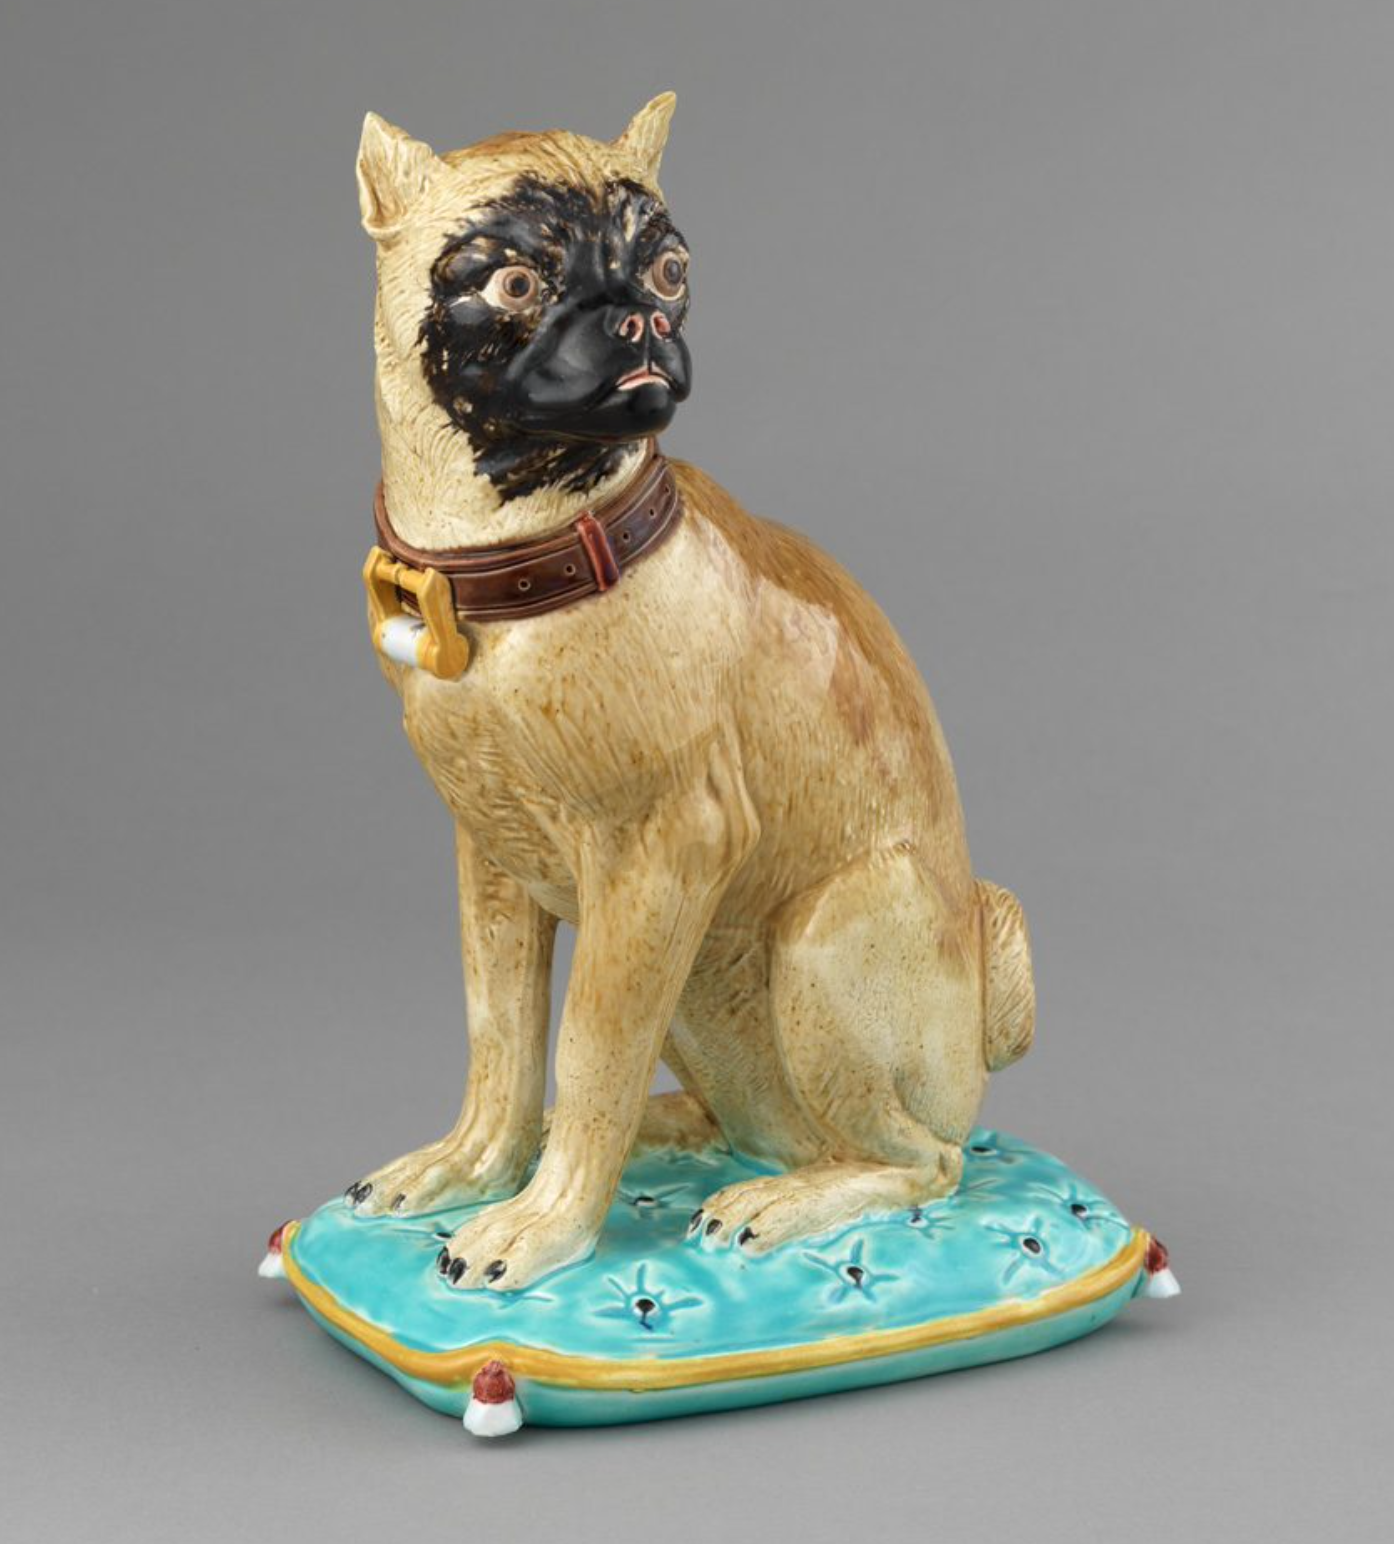 A c. 1880 majolica dog from Britain’s Joseph Holdcroft.
